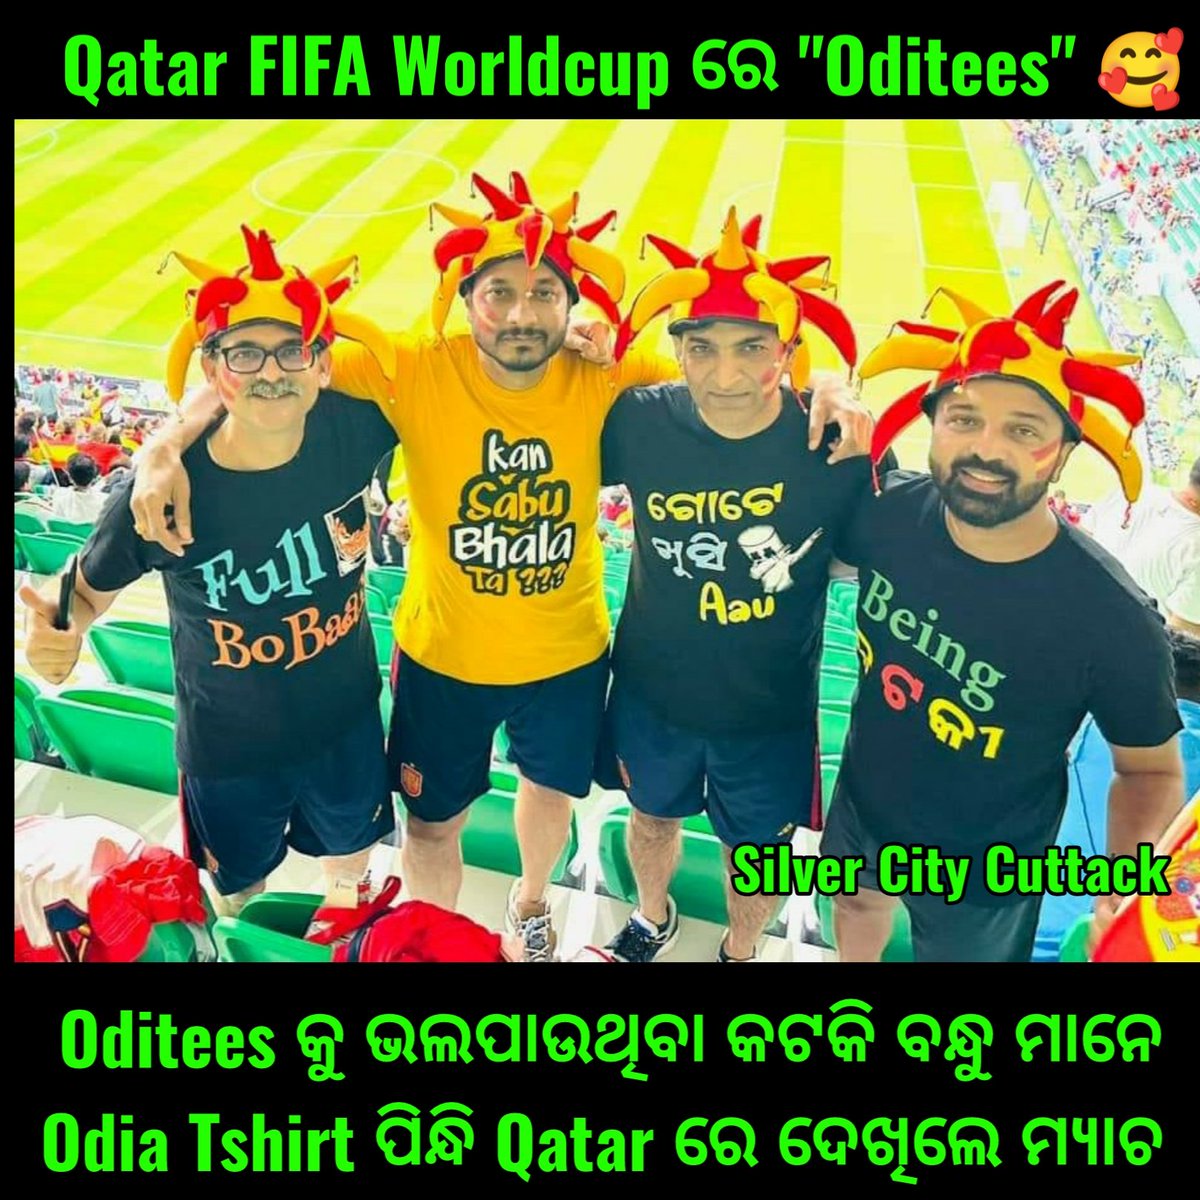 Such a proud moment ❤️😀☺️☺️ Thanks for all the love for Oditees ☺️❤️ #worldcup #fifaworldcup2022 #fifa #fifaworldcup #qatar #qatarworldcup #qatar2022 #friends #football #footballfans